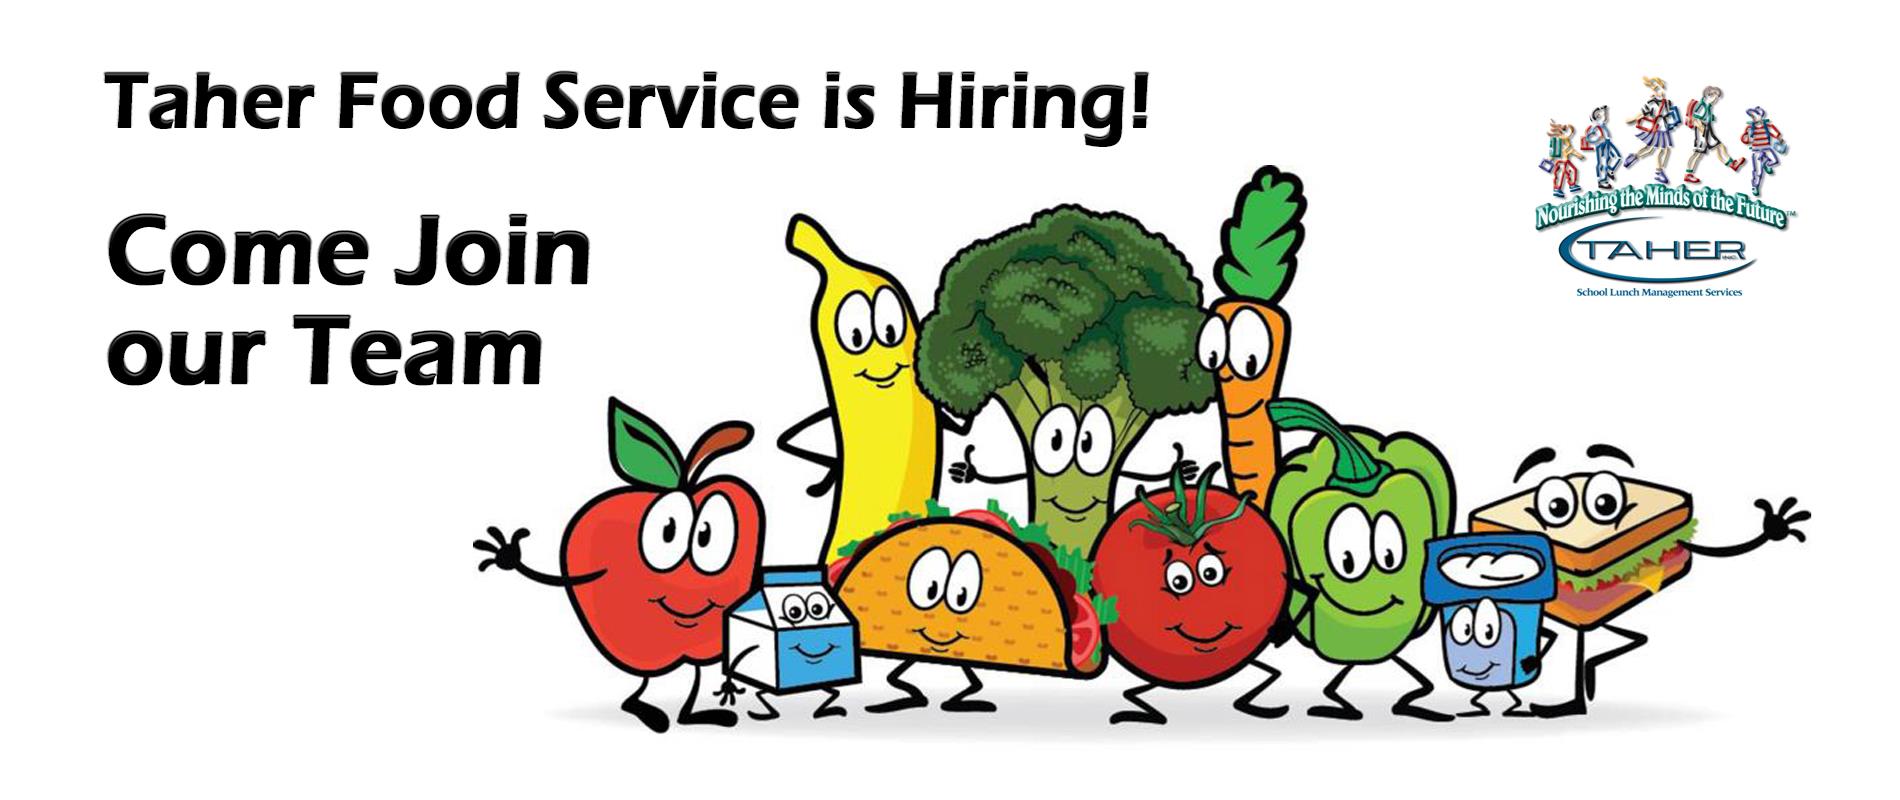 clipart of vegetables standing and smiling along with the Taher company logo inviting you to apply for open positions for the next school year